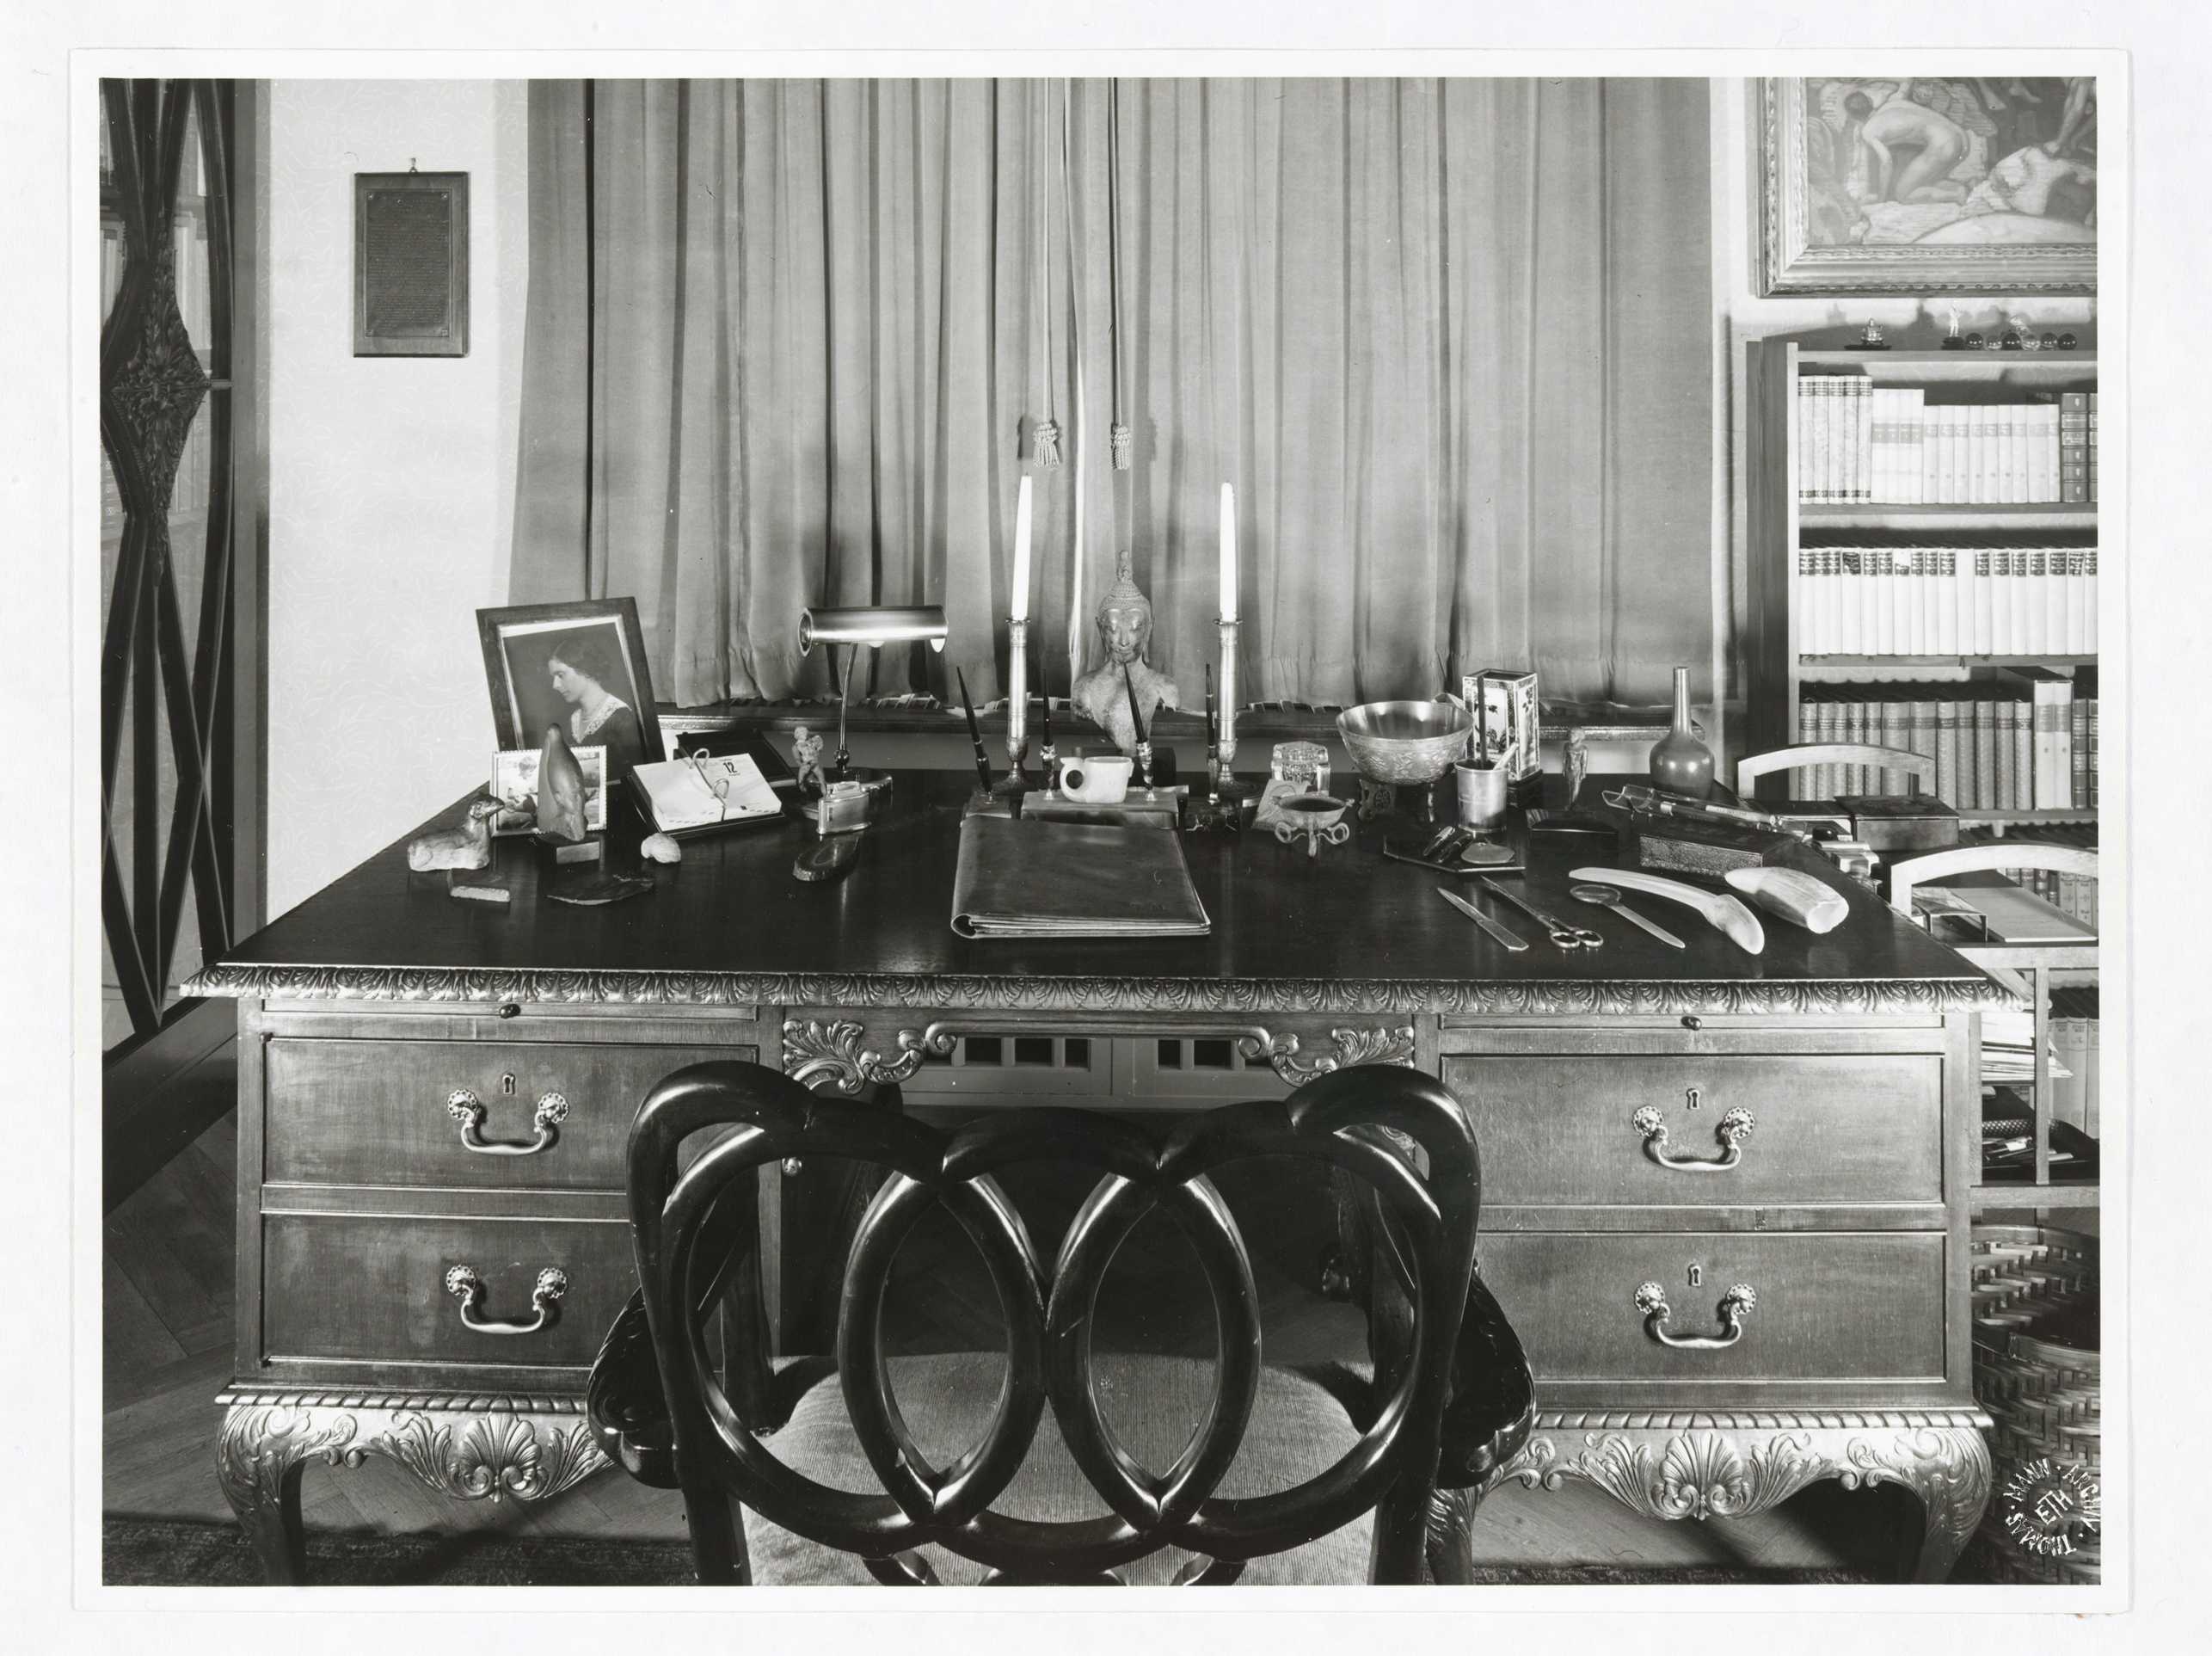 Enlarged view: Old black and white photo of the famous desk of Thomas Mann